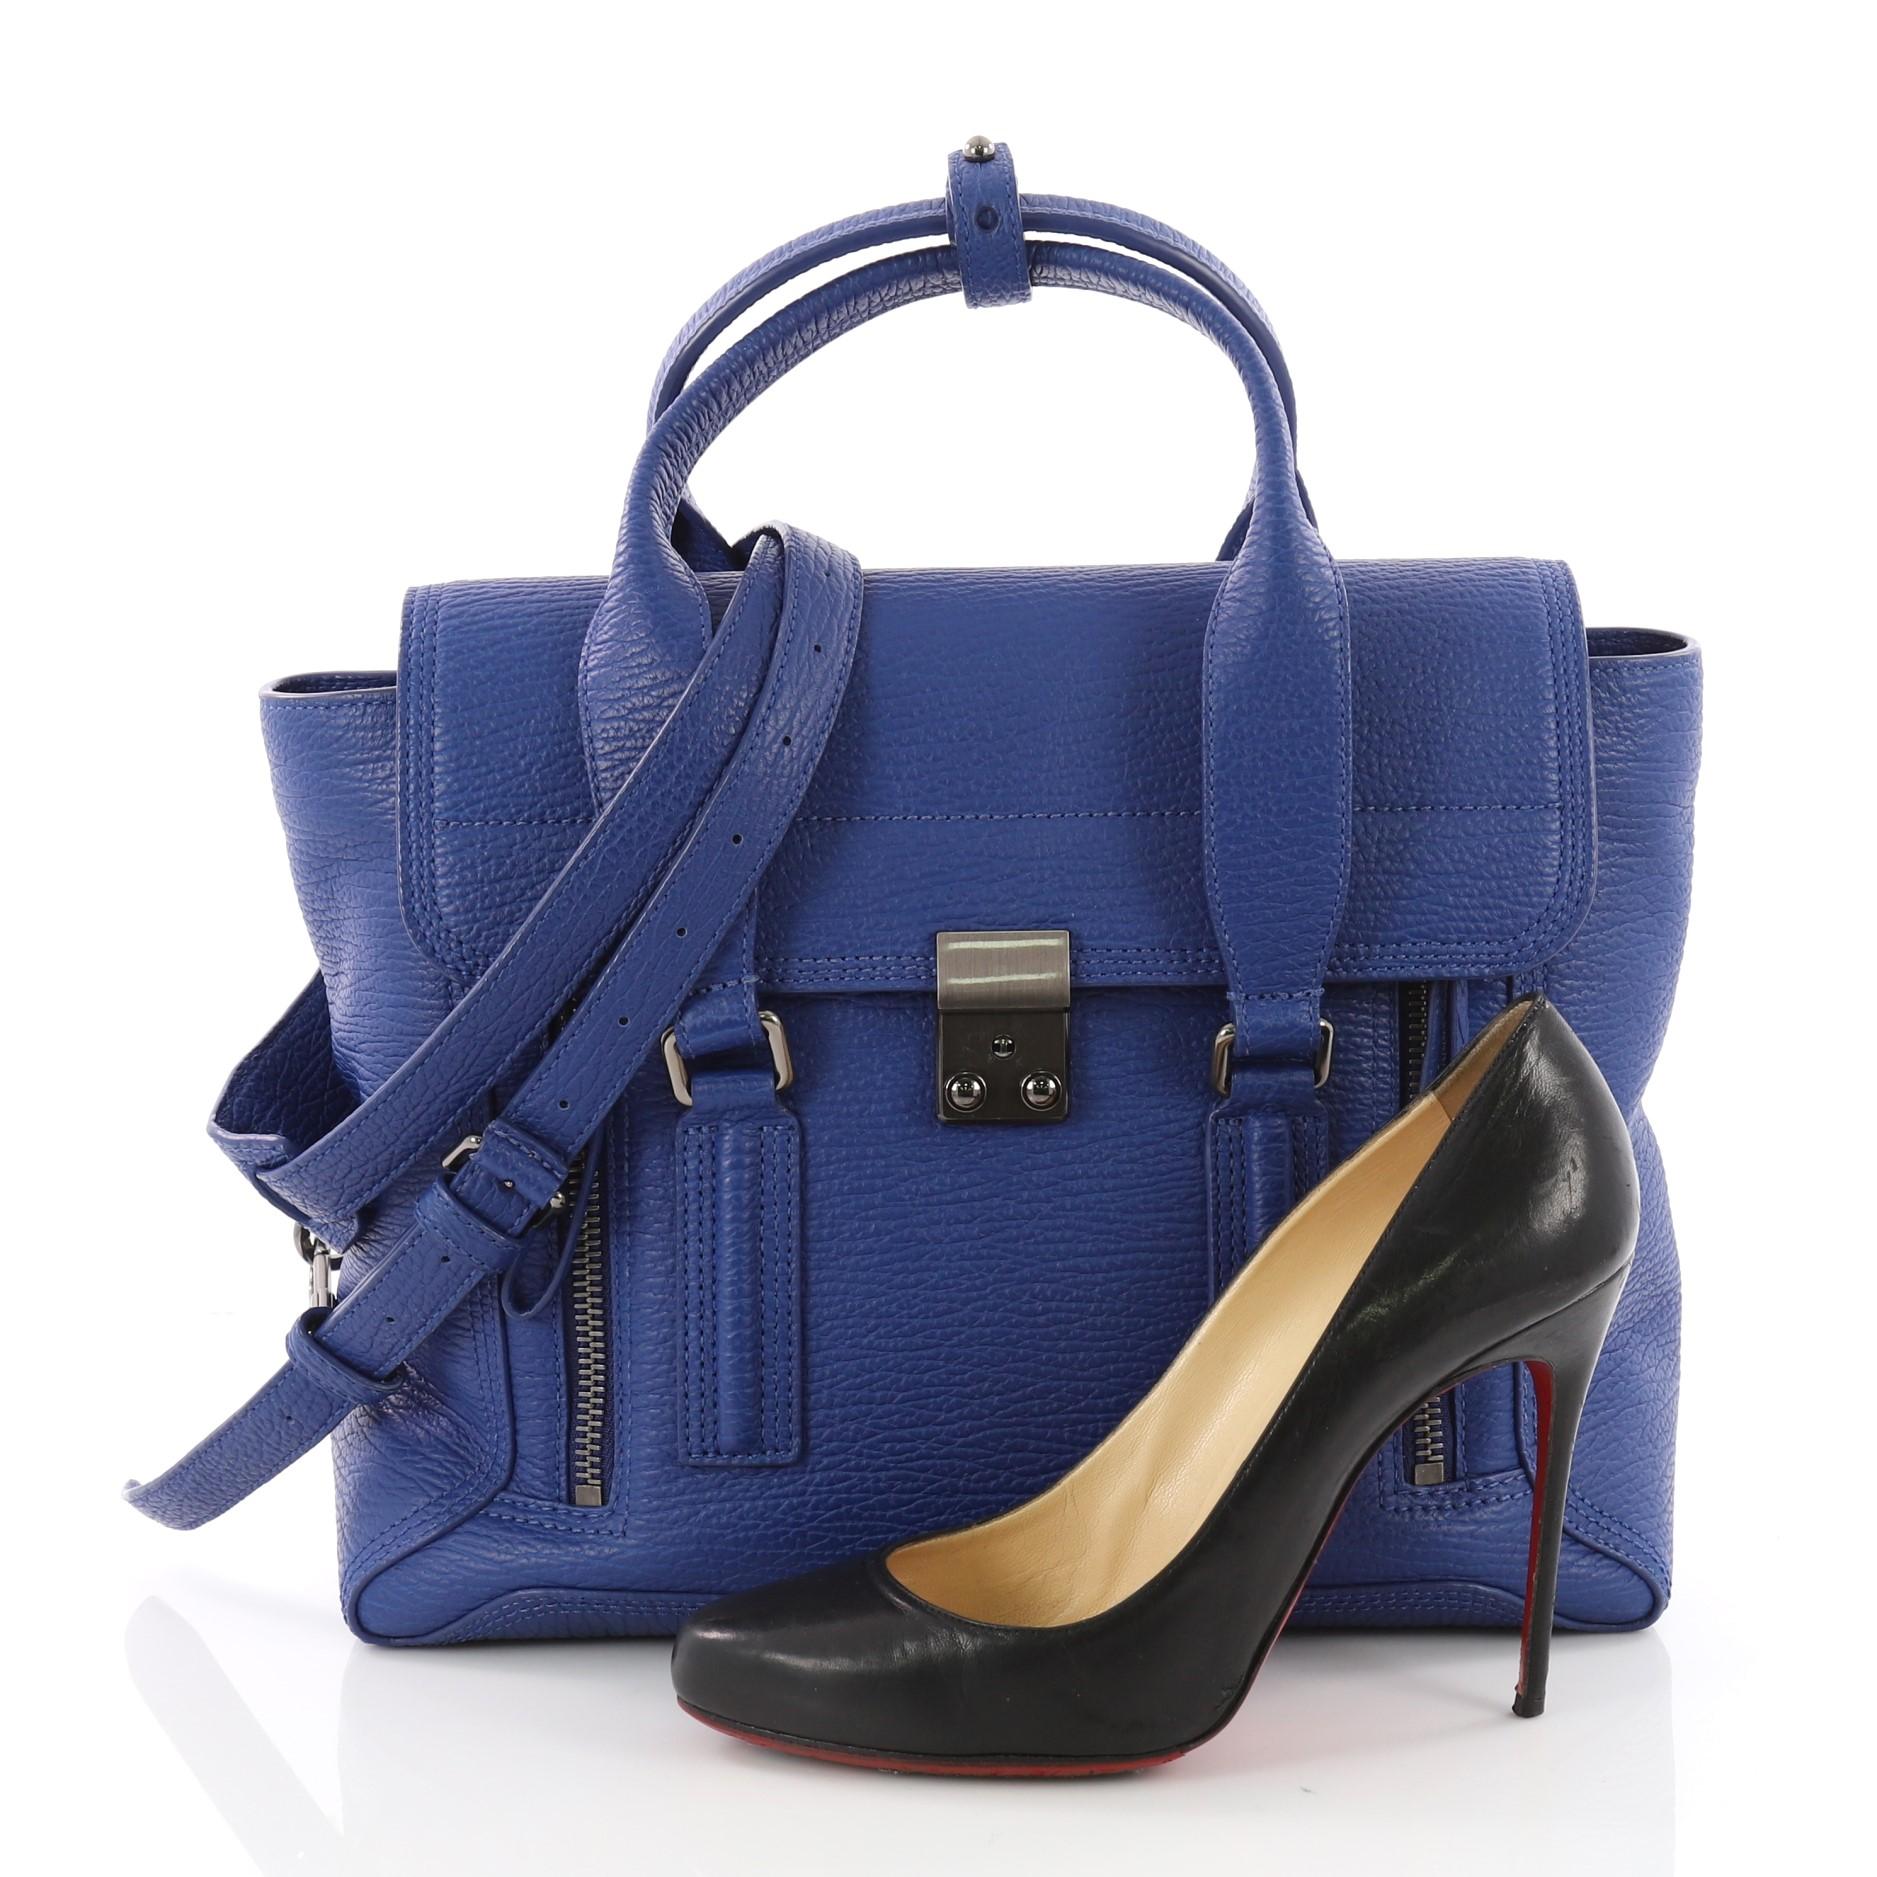 This authentic 3.1 Phillip Lim Pashli Satchel Leather Medium is a practical bag with a stylish edge made for on-the-go moments. Crafted from blue leather, this chic satchel features dual top handles, expandable zip sides, top flap push-lock closure